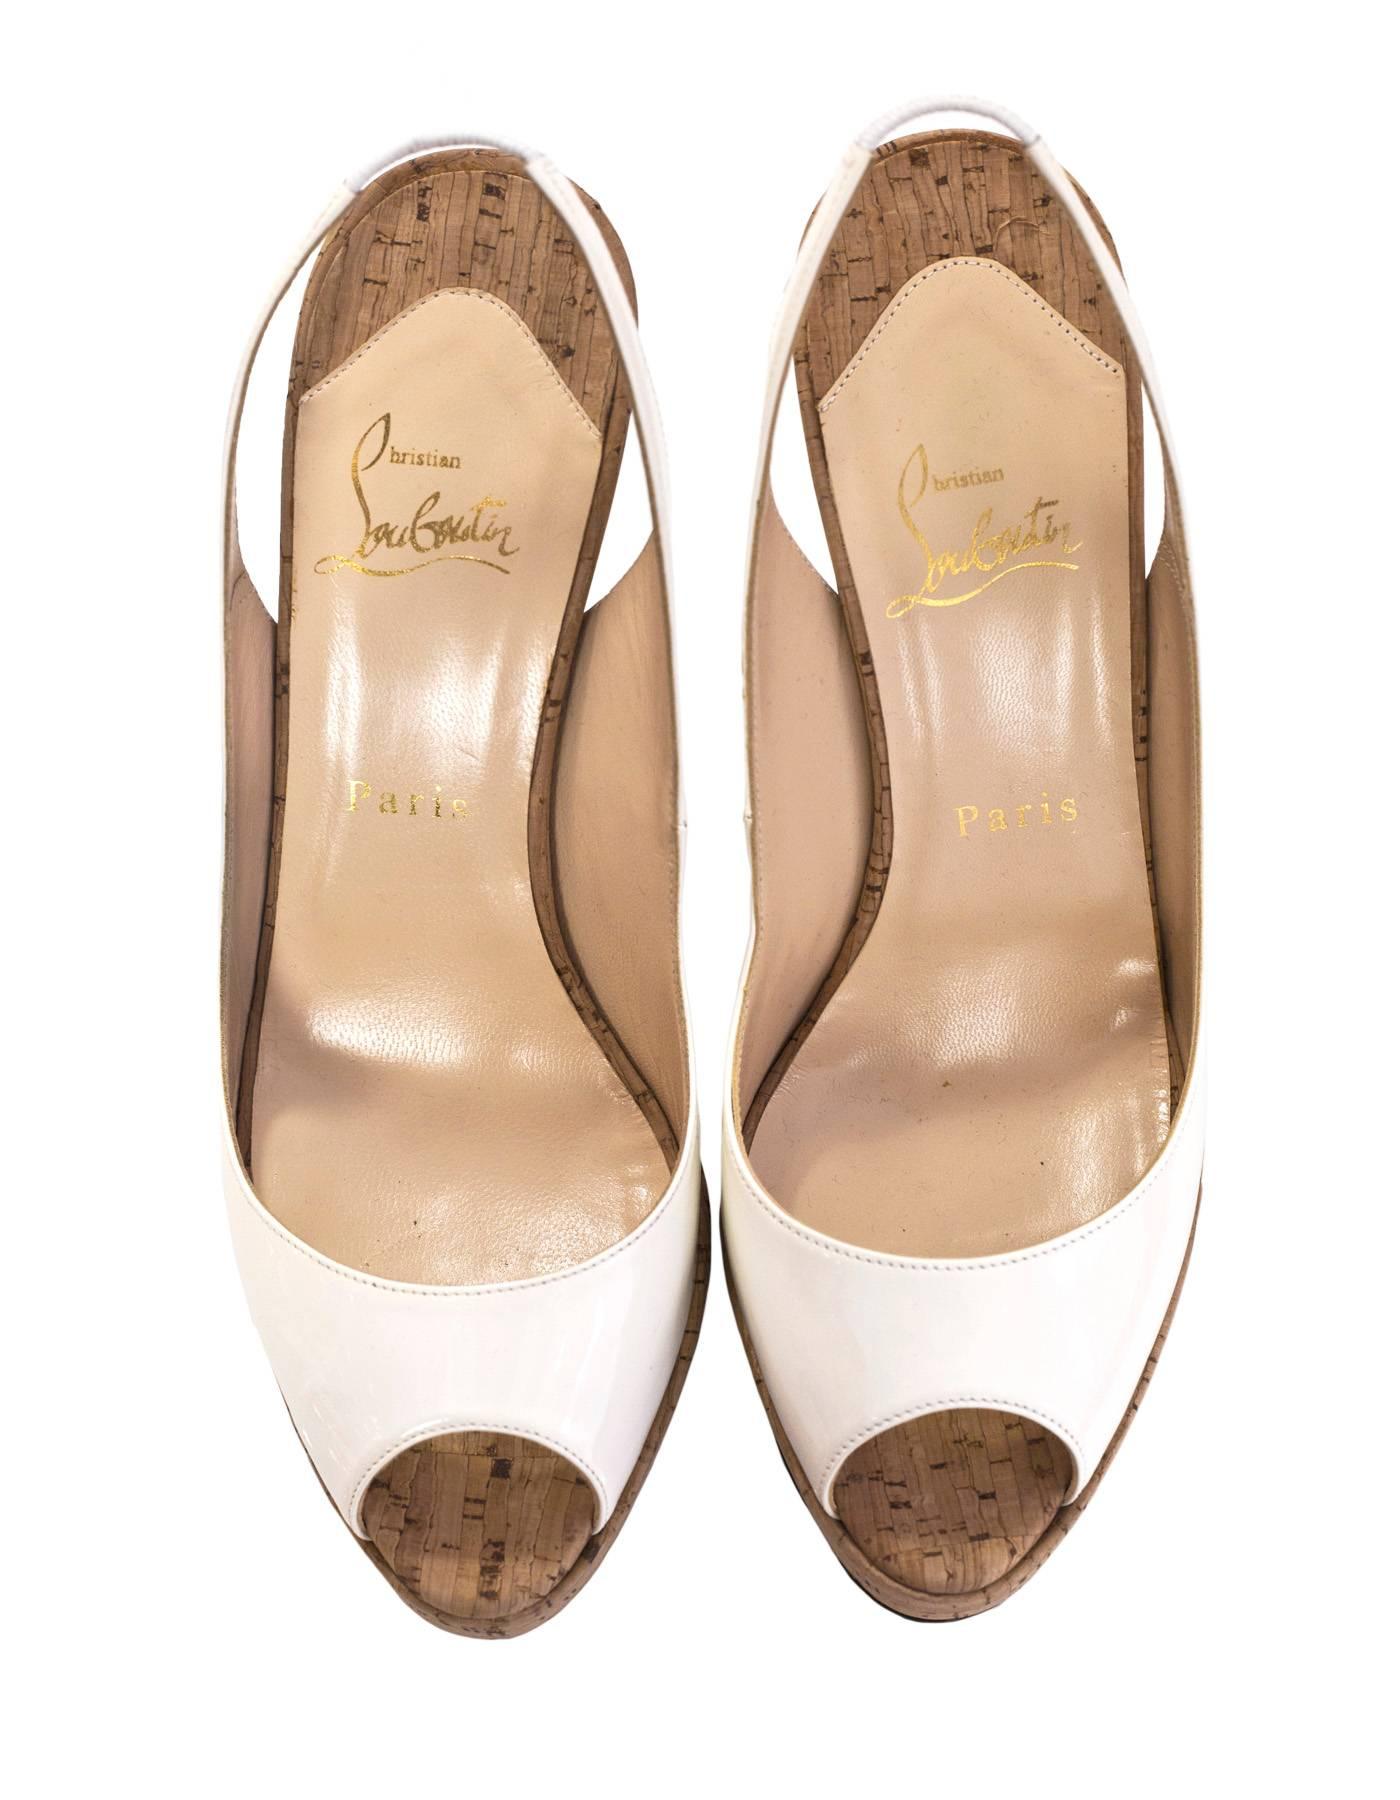 Christian Louboutin White Patent & Cork Peep-Toe Pumps Sz 38.5 In Excellent Condition In New York, NY